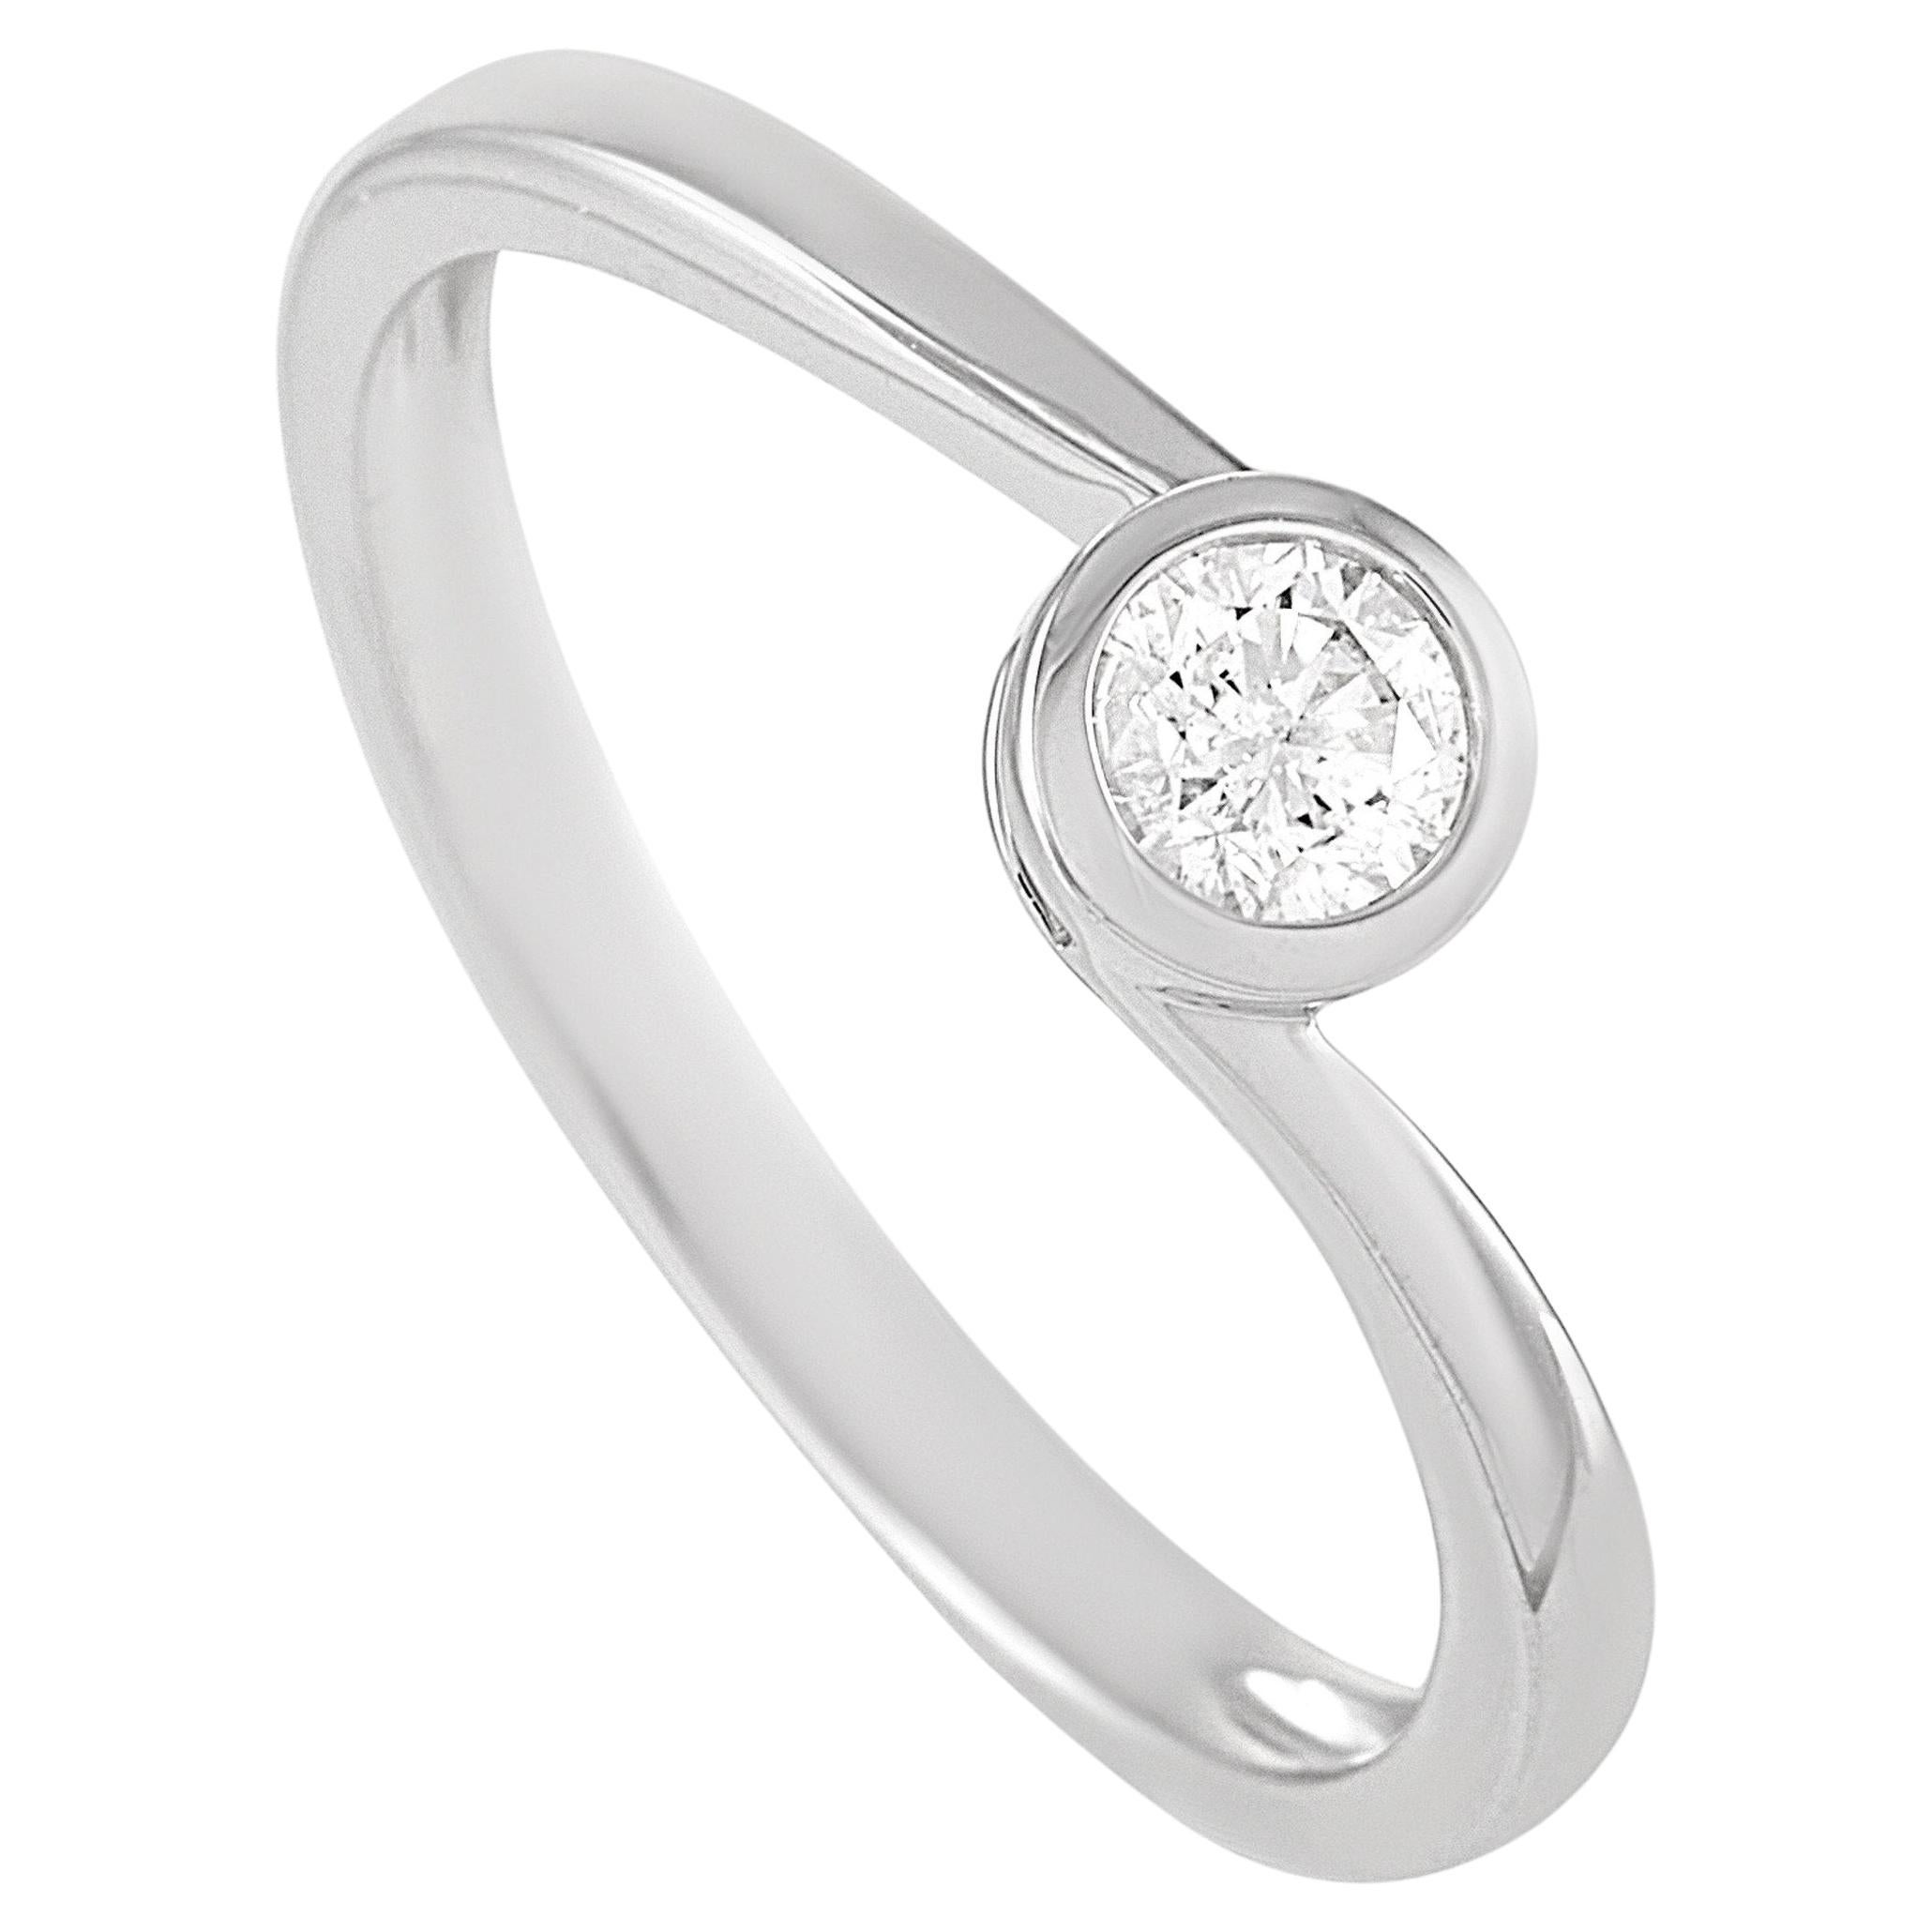 LB Exclusive 14K White Gold 0.26 Ct Diamond Ring For Sale